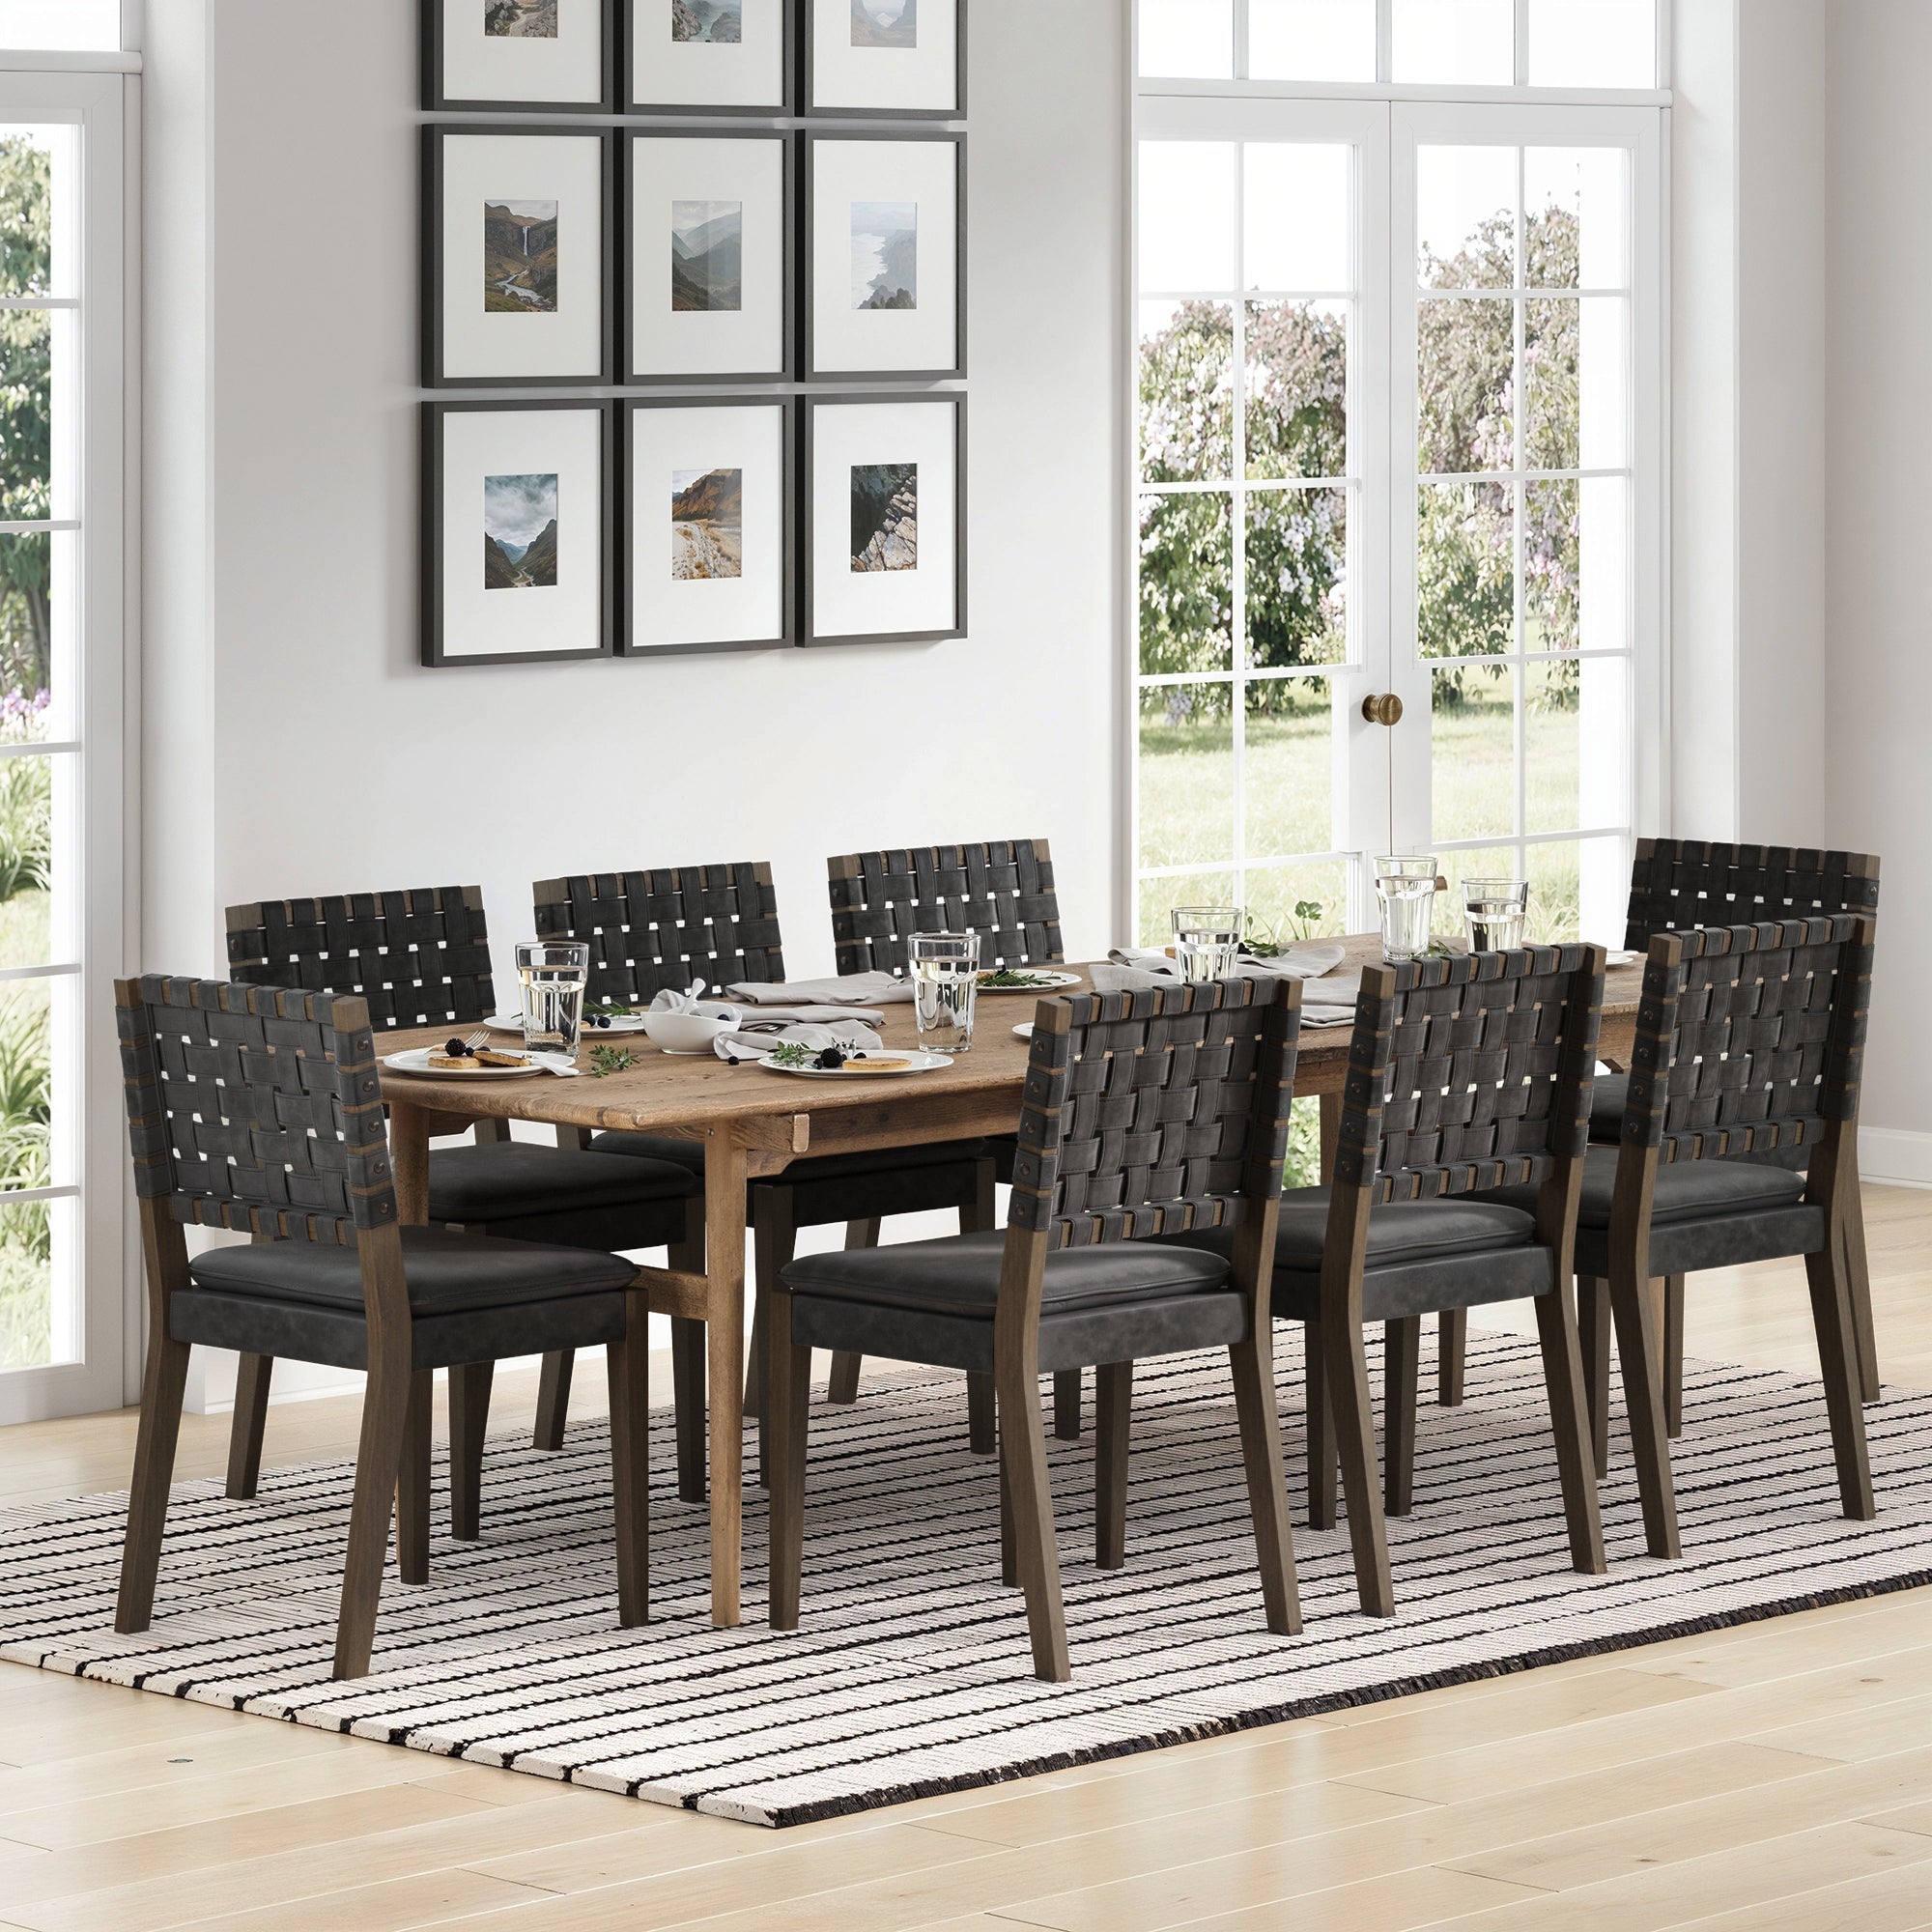 Set of 8 Faux Leather Dining Chairs Black